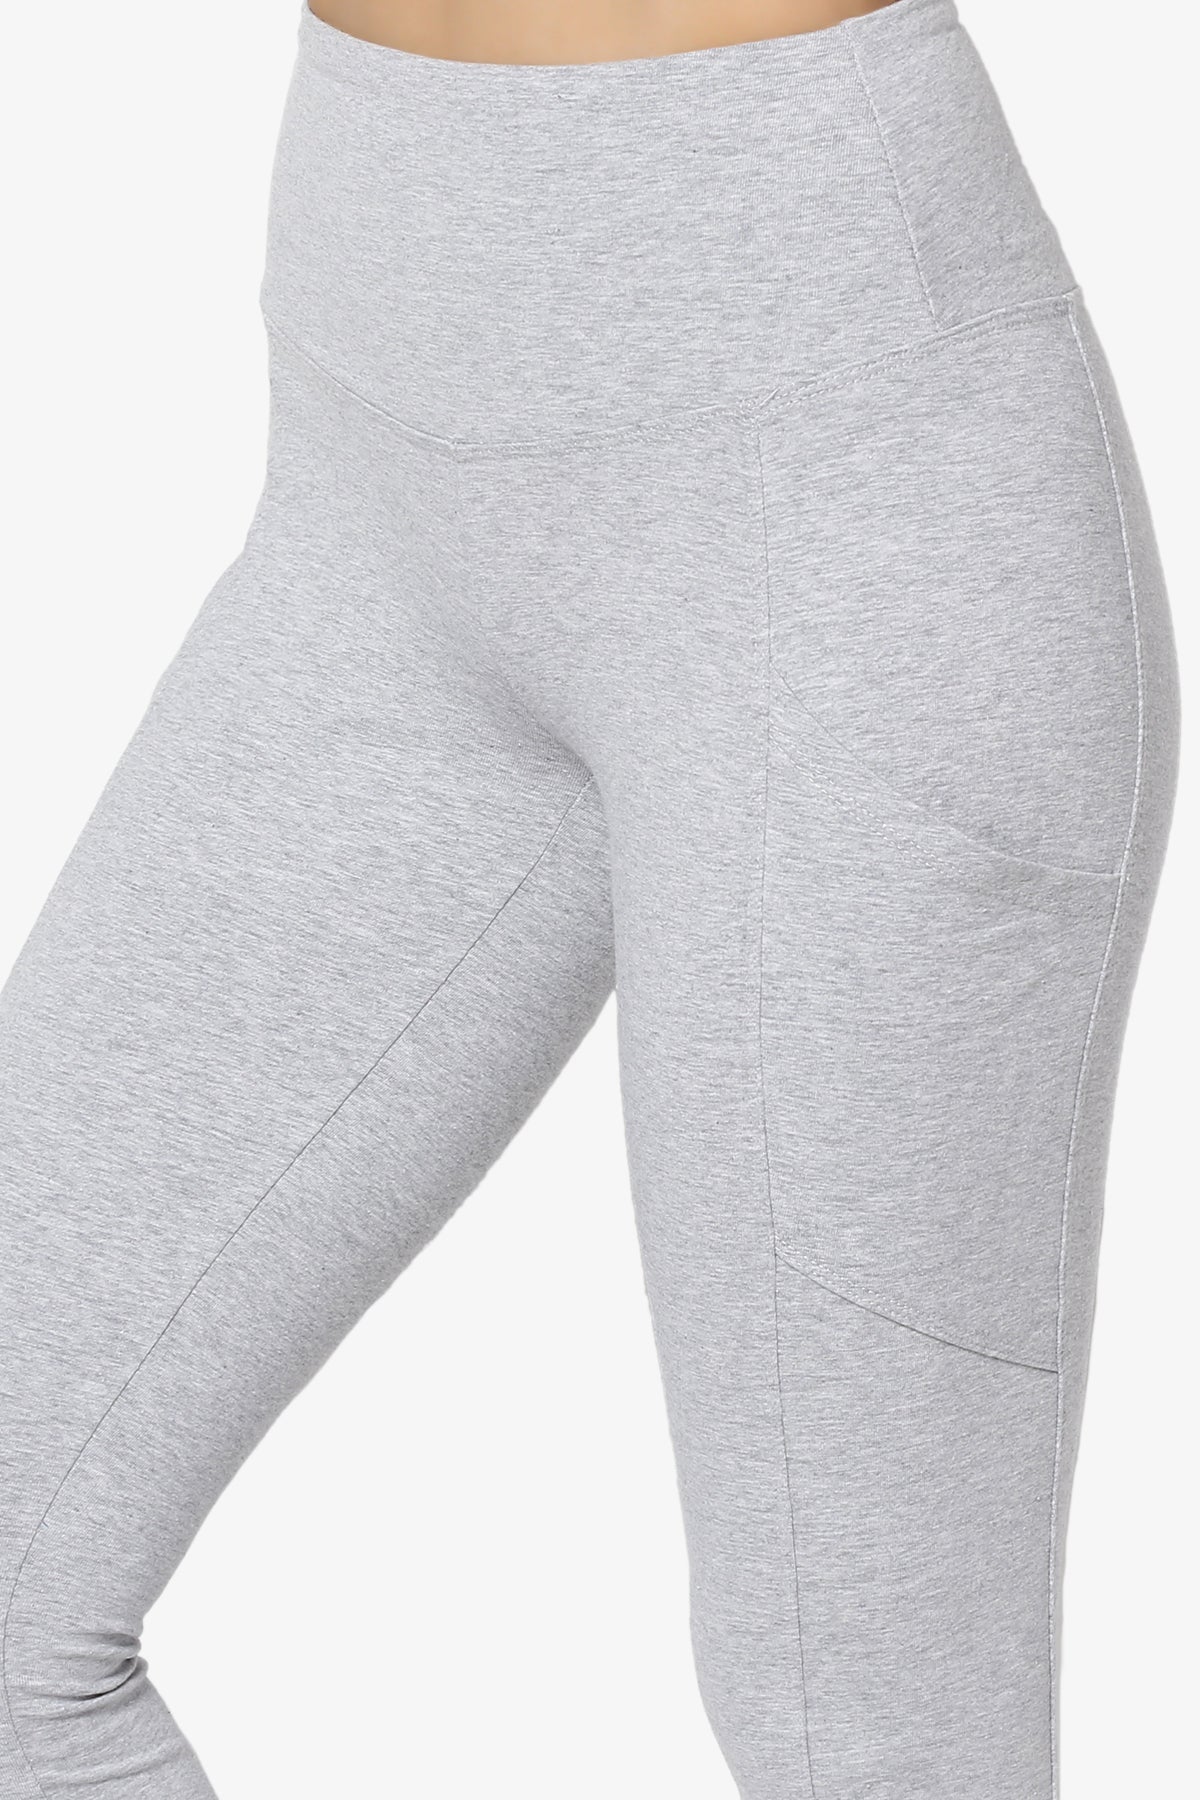 Ansley Luxe Cotton Leggings with Pockets HEATHER GREY_5